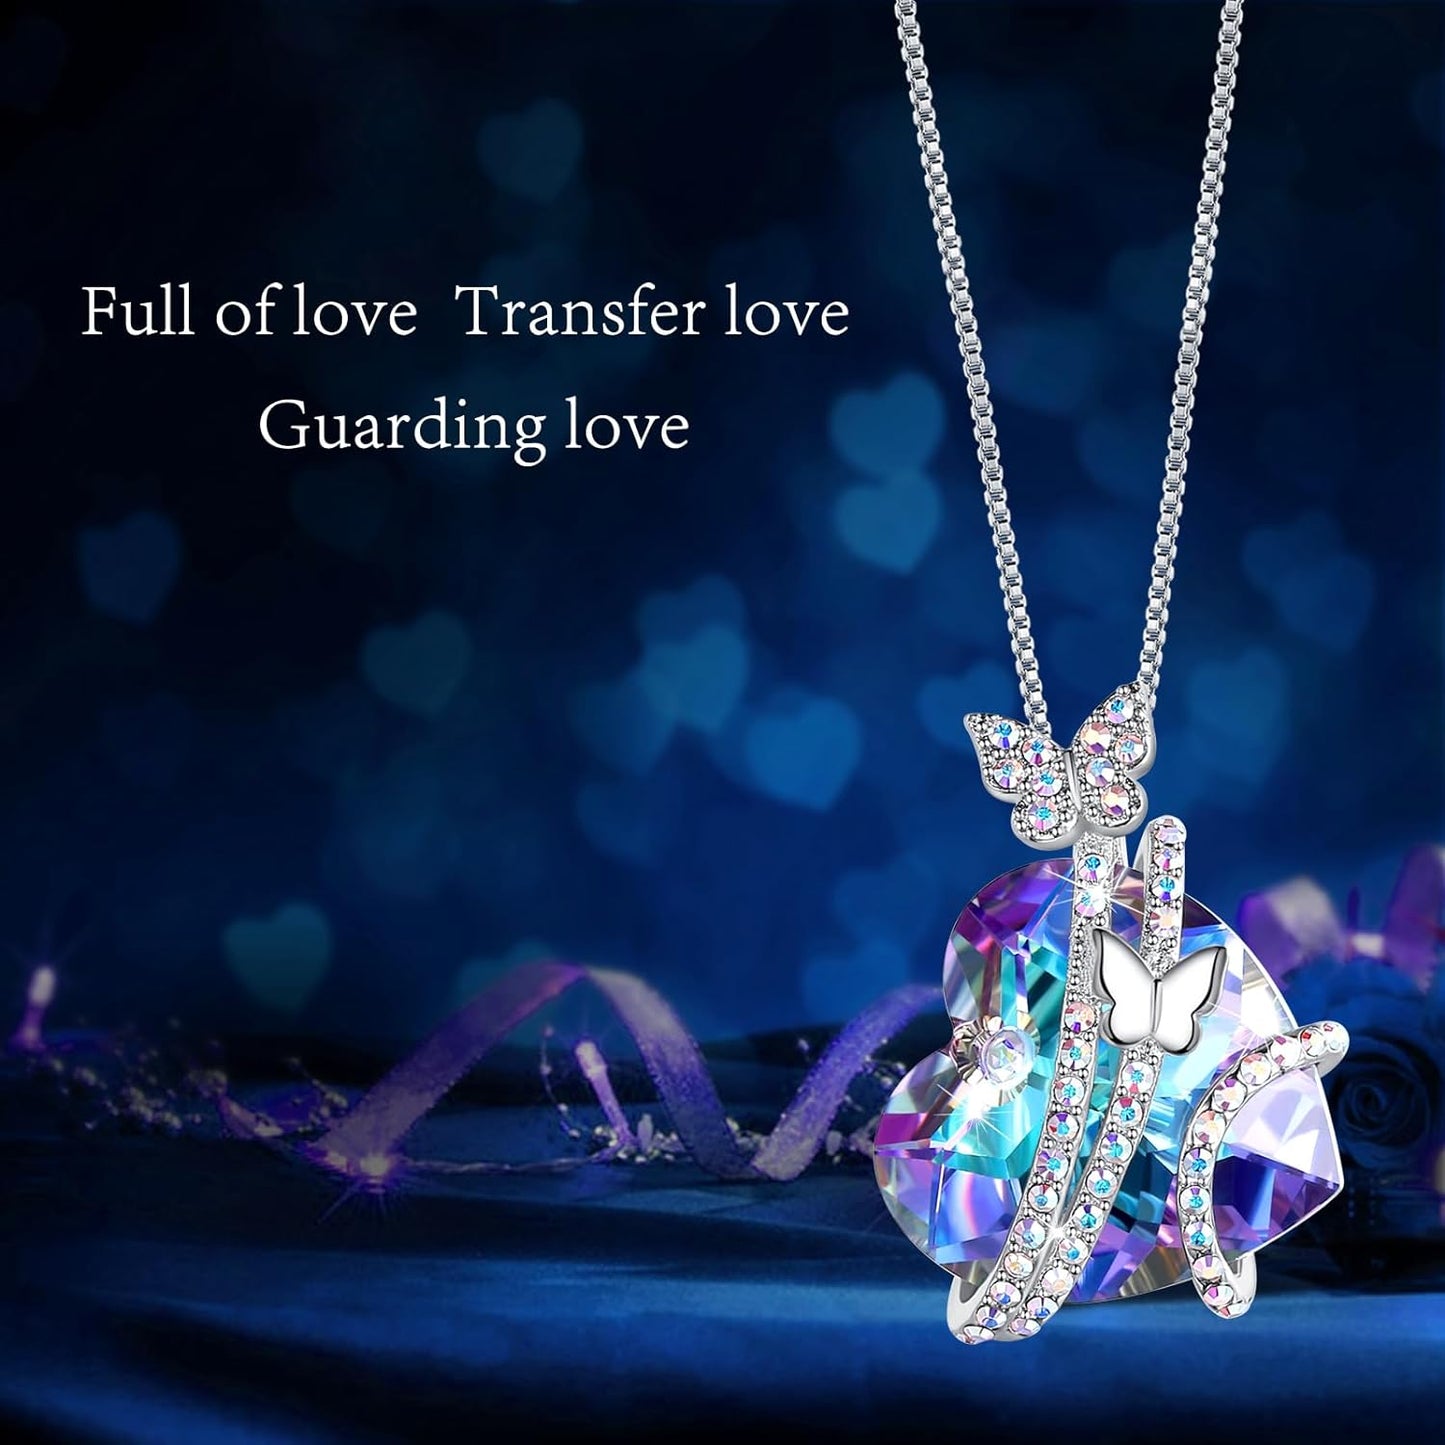 Necklaces for Women, Butterfly Love Heart Pendant Necklace with Birthstone Crystals